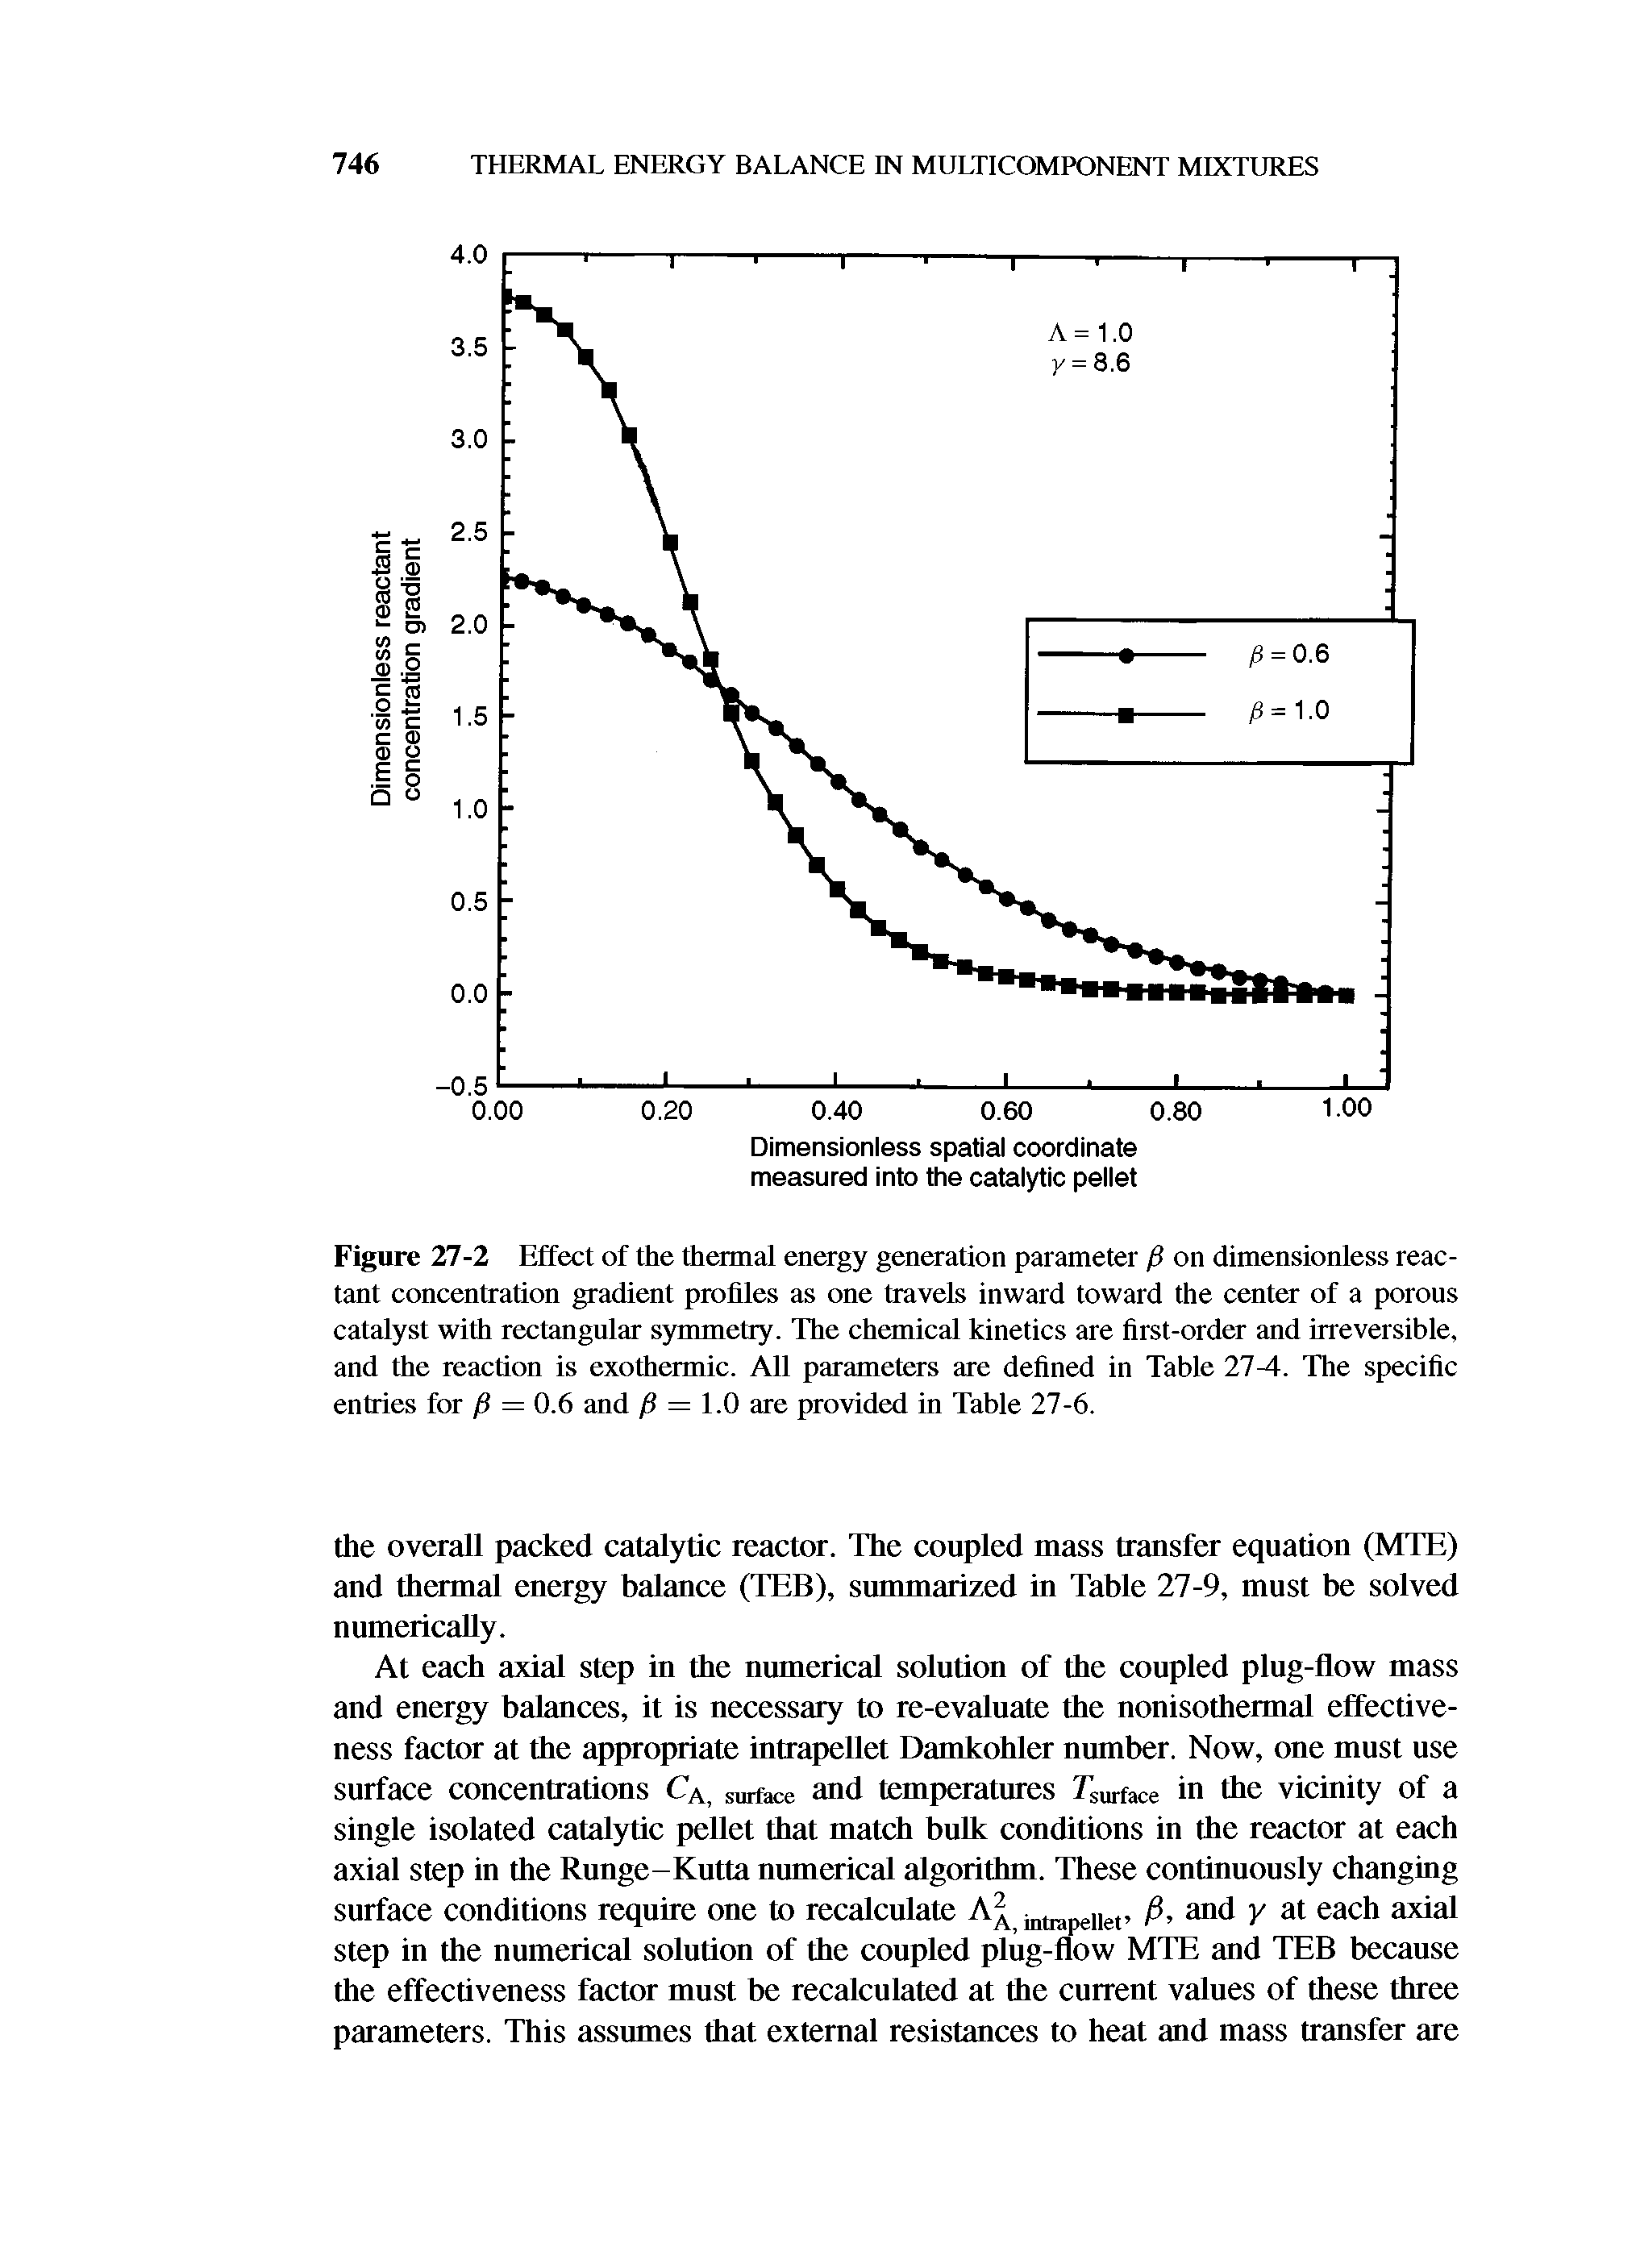 Figure 27-2 Effect of the thennal energy generation parameter on dimensionless reactant concentration gradient profiles as one travels inward toward the center of a porous catalyst with rectangular S3Tnmetry. The chemical kinetics are first-order and irreversible, and the reaction is exothermic. All parameters are defined in Table 21 A. The specific entries for p = 0.6 and /S = 1.0 are provided in Table 27-6.